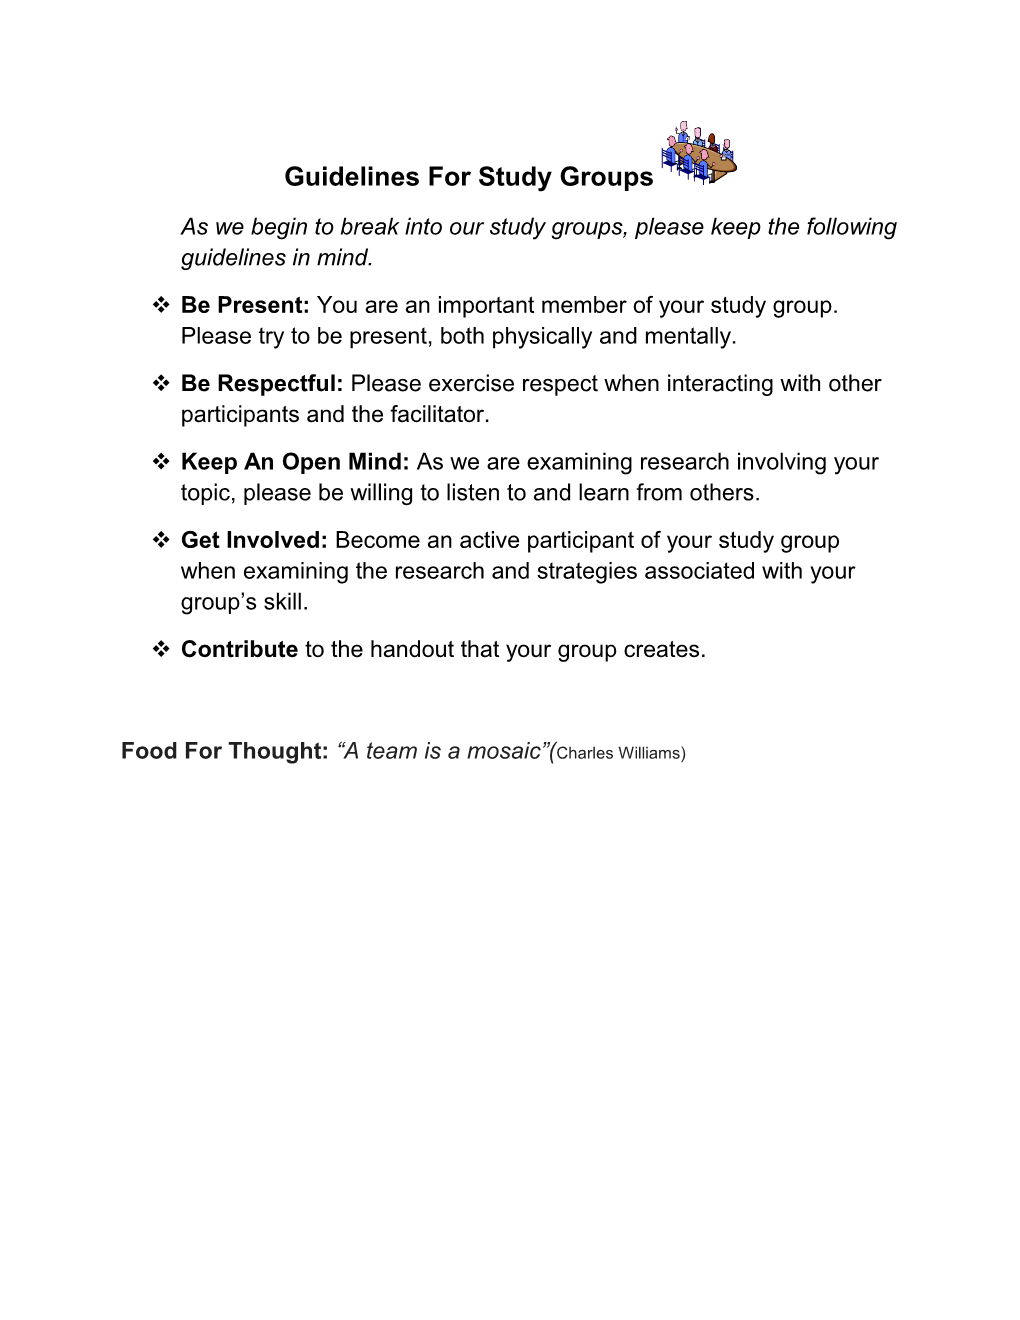 As We Begin to Break Into Our Study Groups, Please Keep the Following Guidelines in Mind